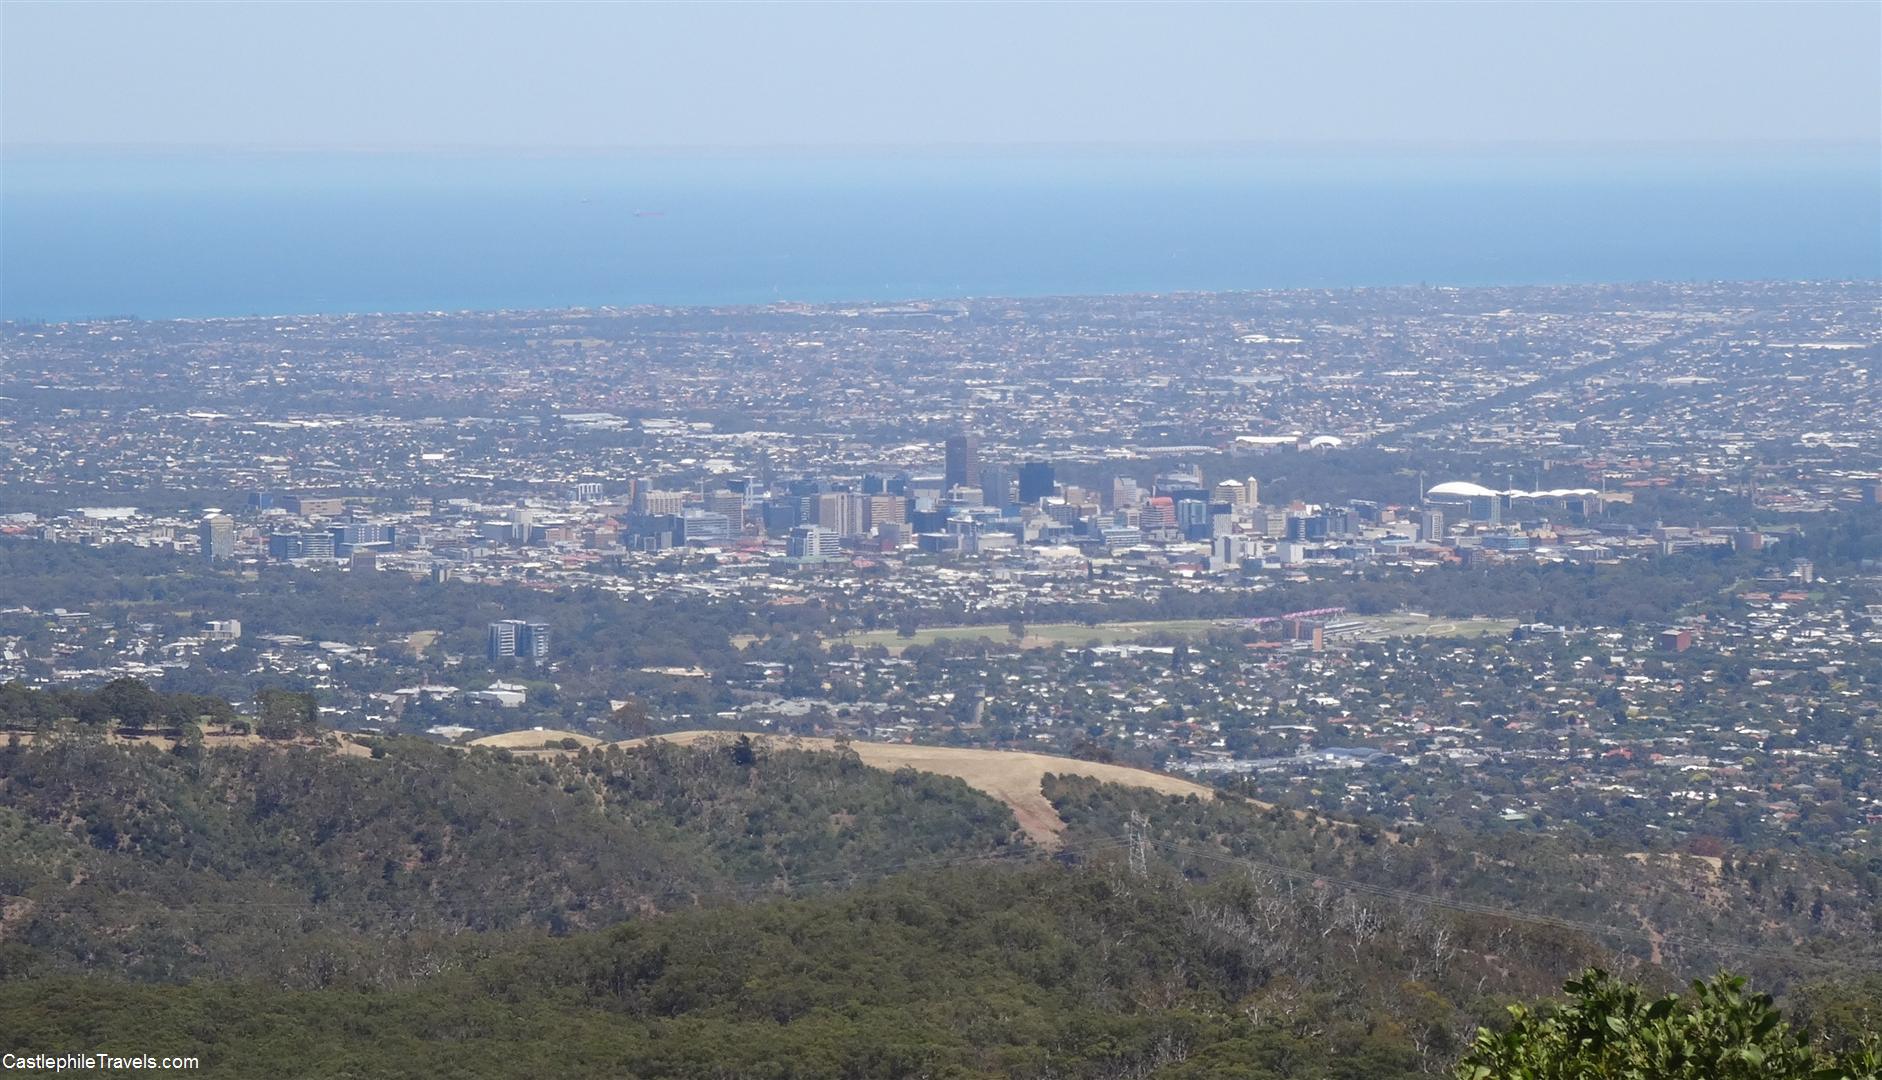 The view over Adelaide from Mount Lofty Summit